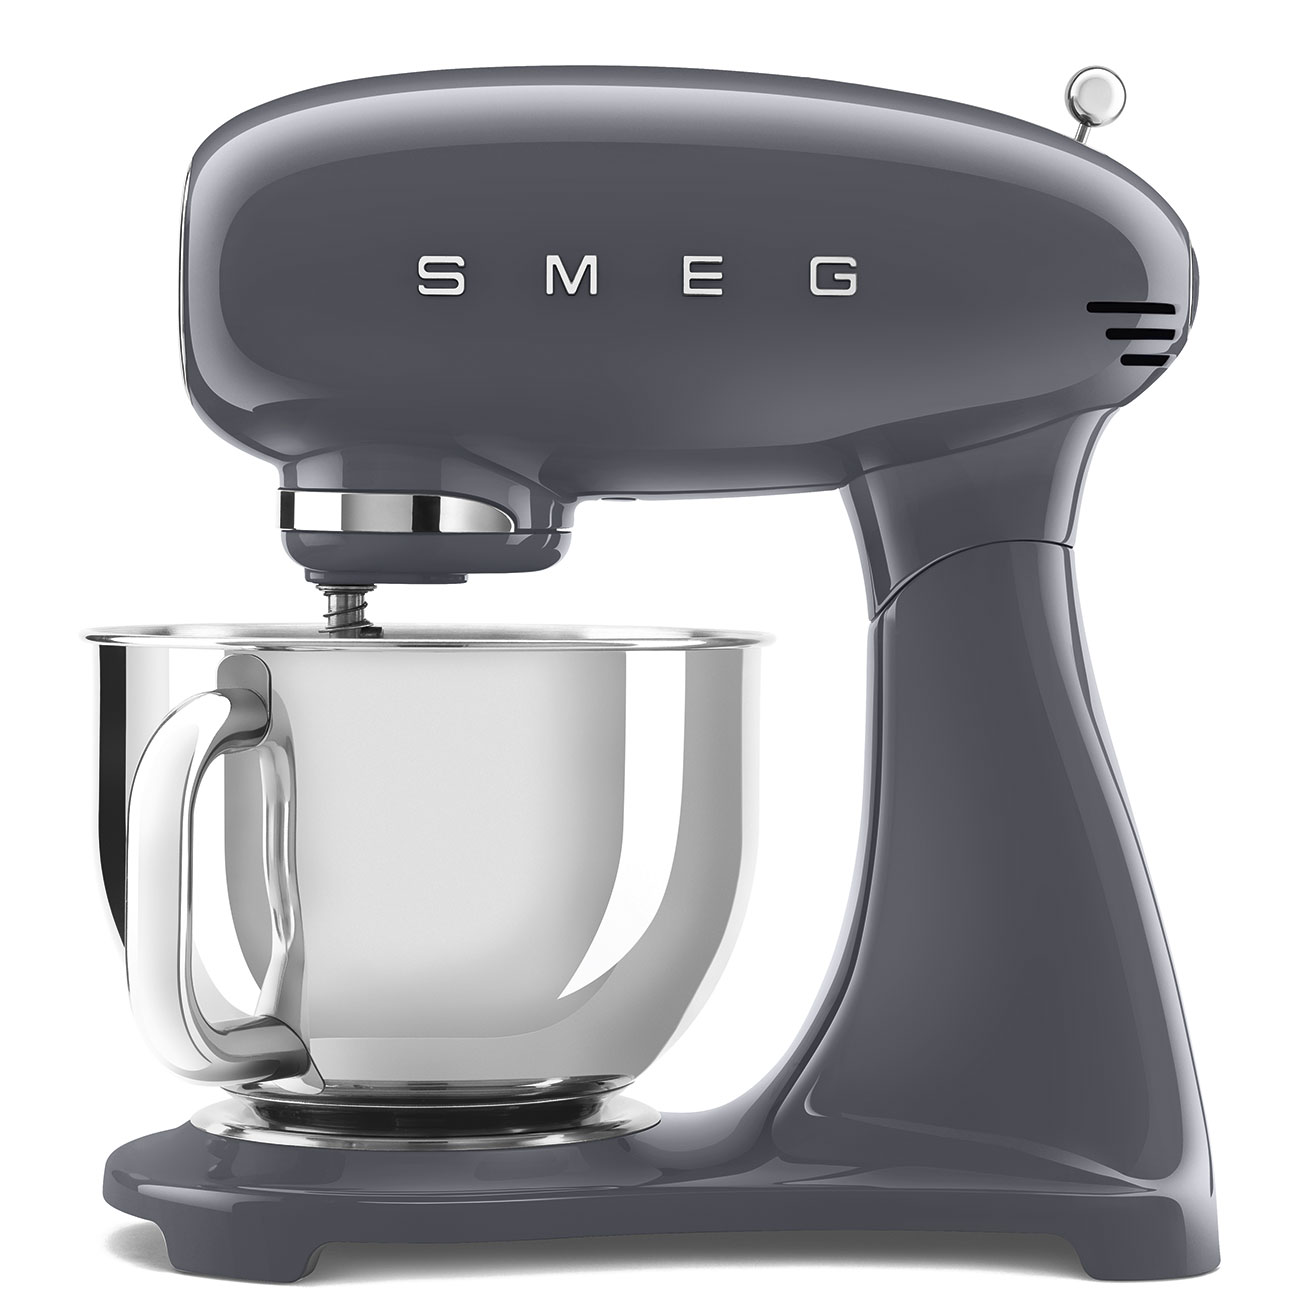 Slate Grey Food Mixer with 4.8l stainless steel bowl - SMF03GRUK_1